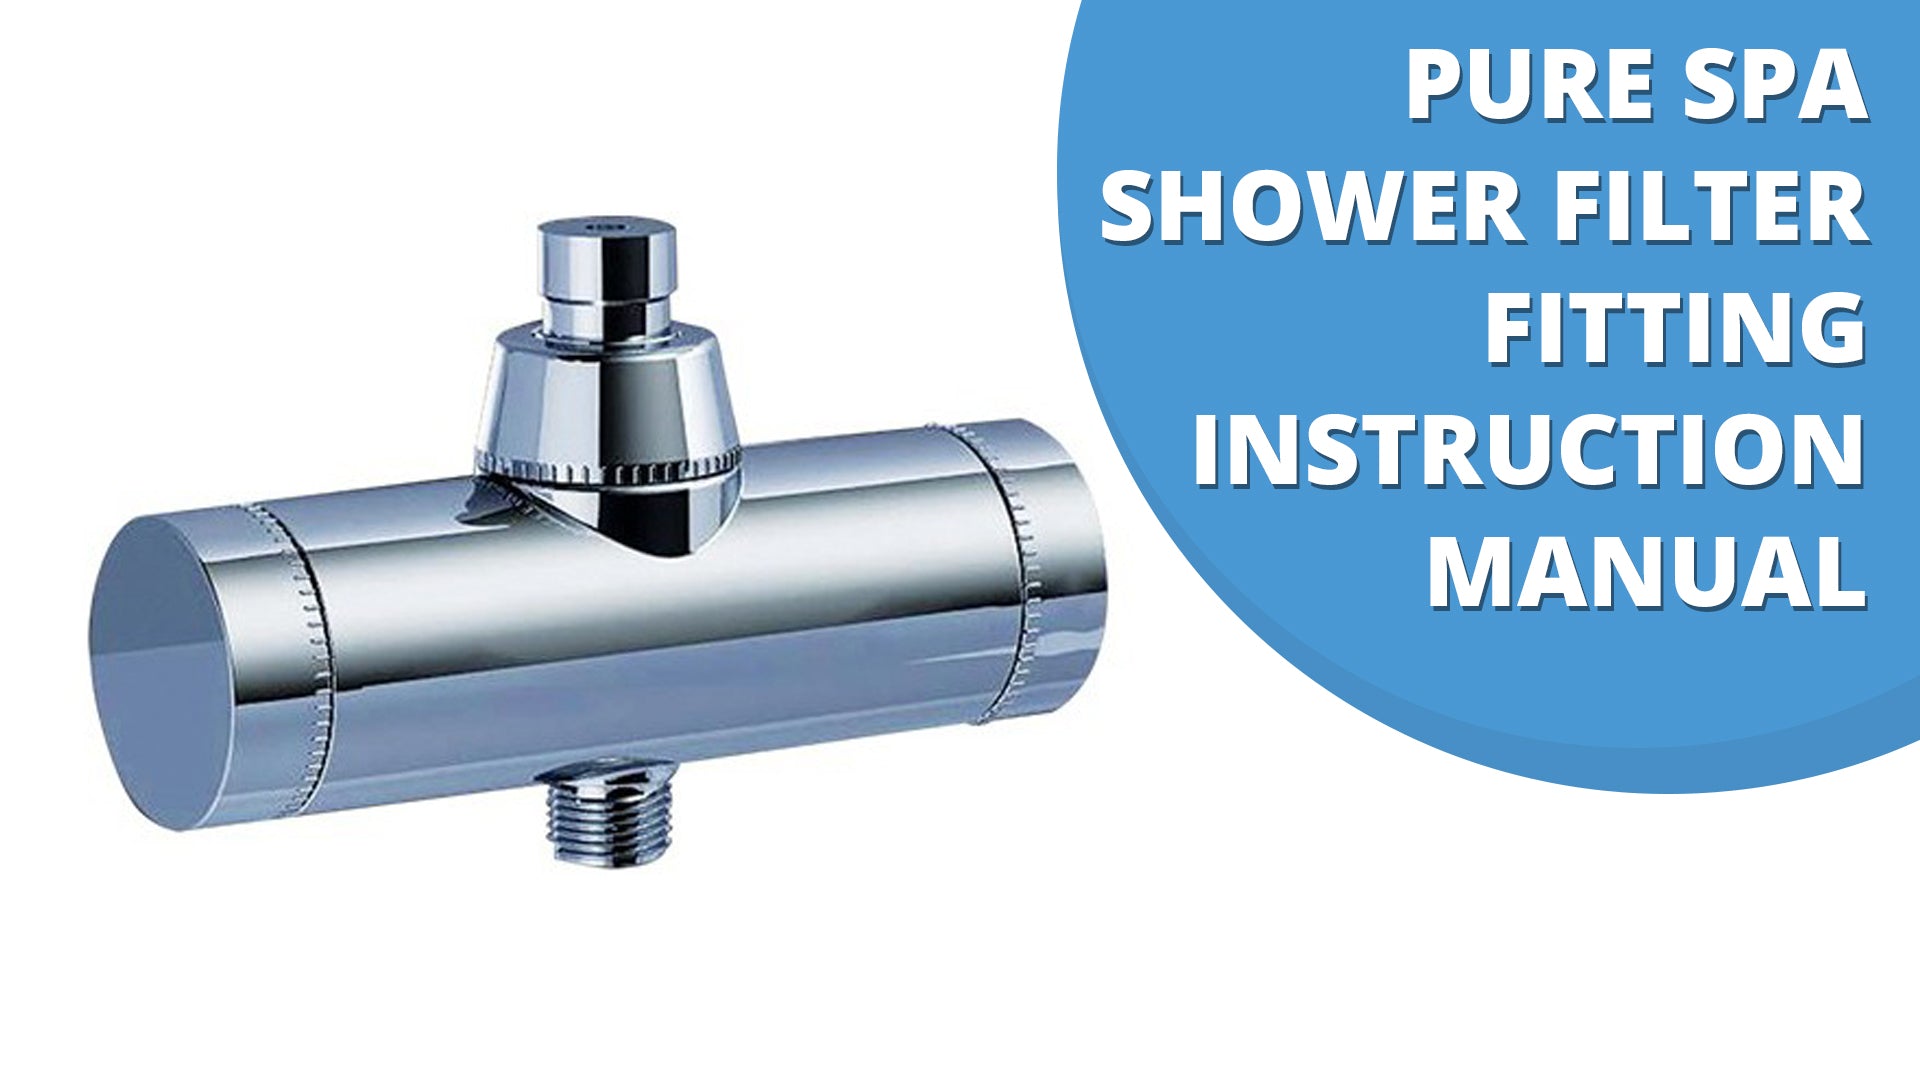 Pure Spa Shower Filter Fitting Instruction Manual